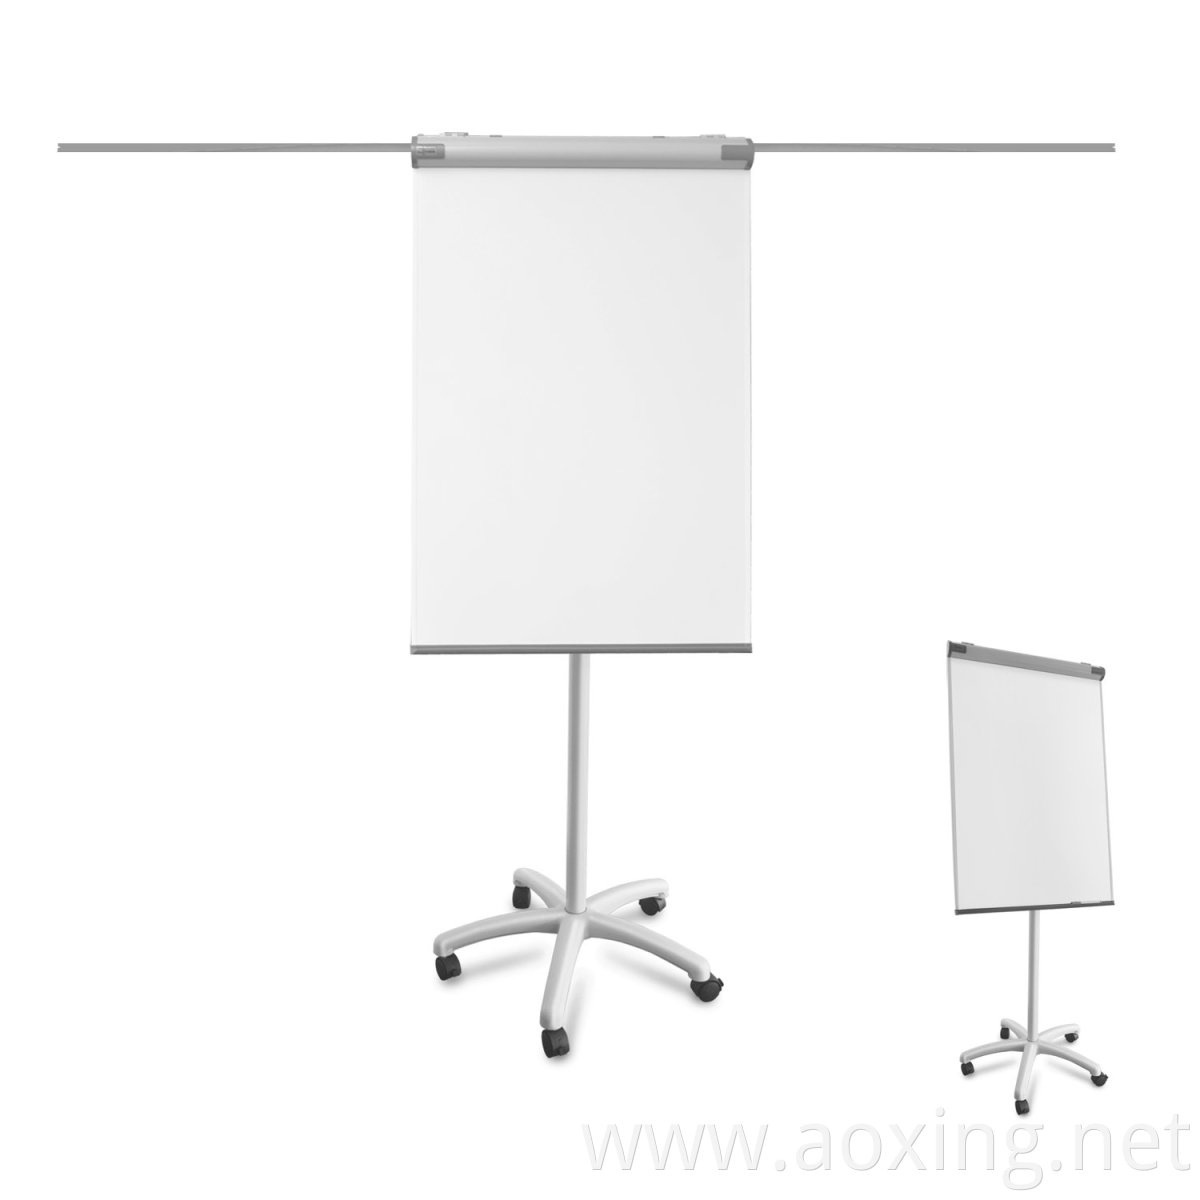 Professional Flipchart Easel for Mobile and Versatile Magnetic Drywipe whiteboard with plastic pad clamp